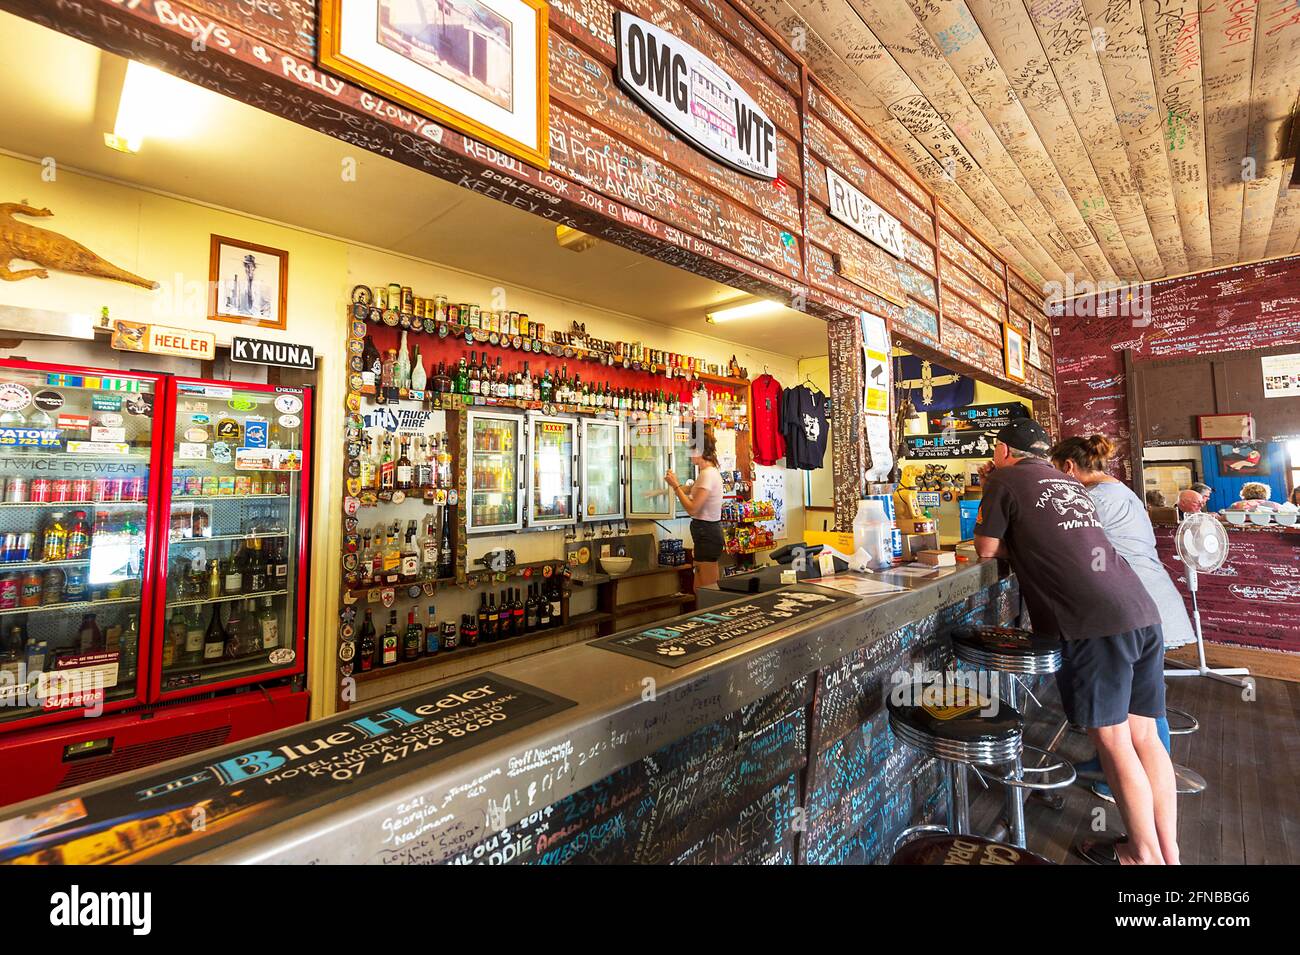 Bar counter of the iconic Blue Heeler Hotel with its writings on the walls and ceiling, Kynuna, Queensland, QLD, Australia. Stock Photo